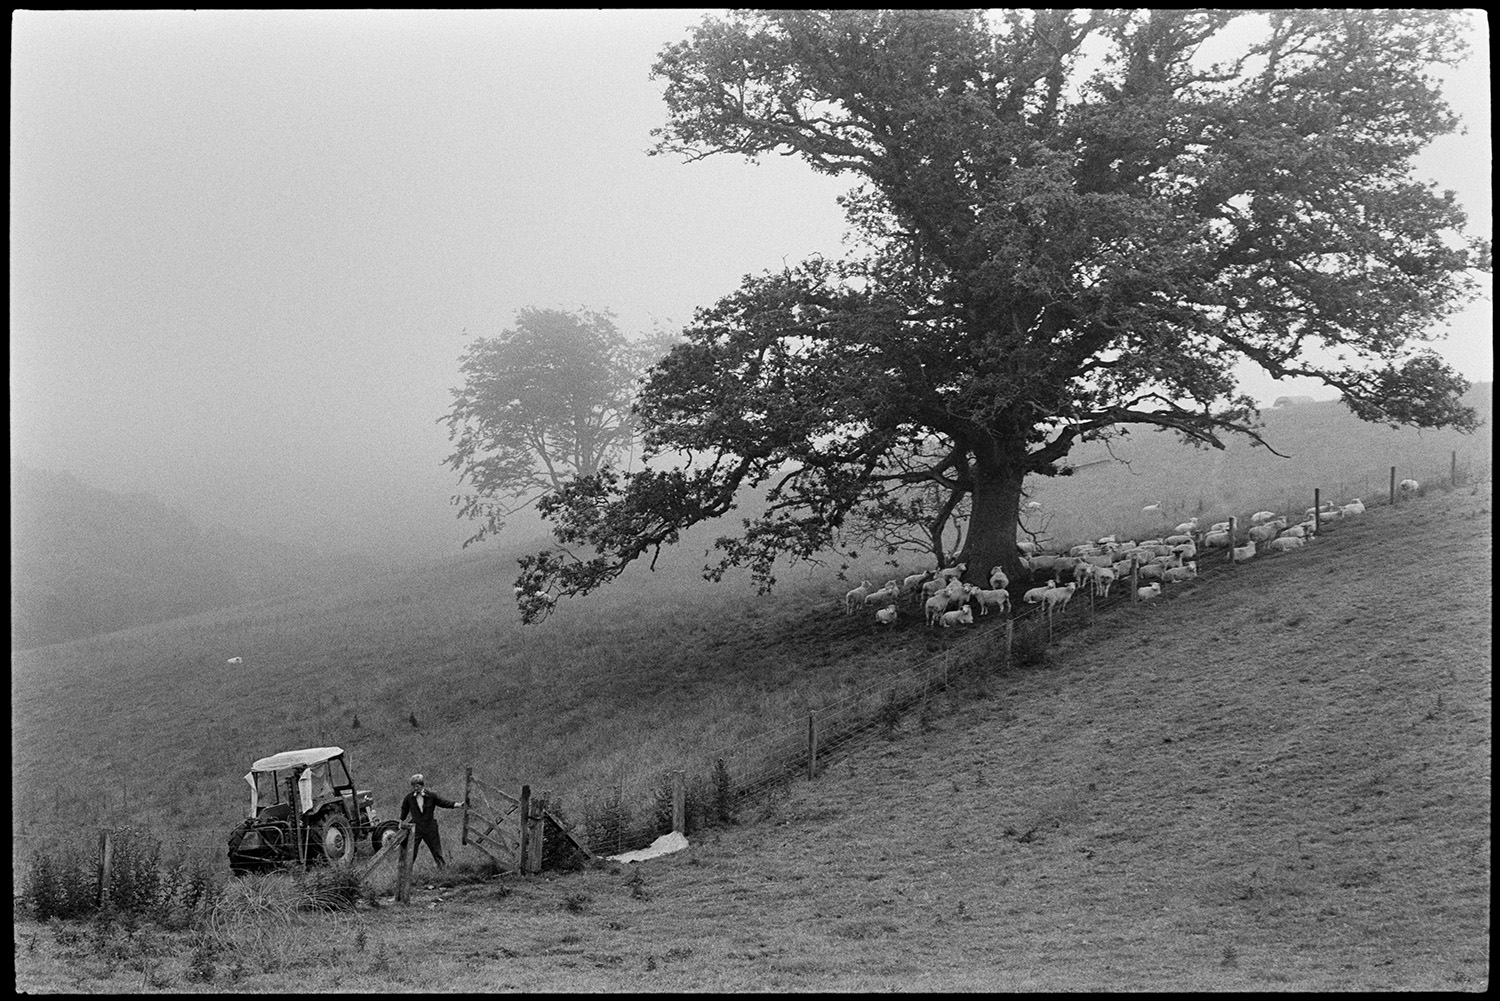 Farmer checking stock with tractor. 
[A man checking sheep in a field at Densham, Ashreigney. He has a tractor and is closing or opening a field gate. The sheep are gathered under the shade of a tree.]